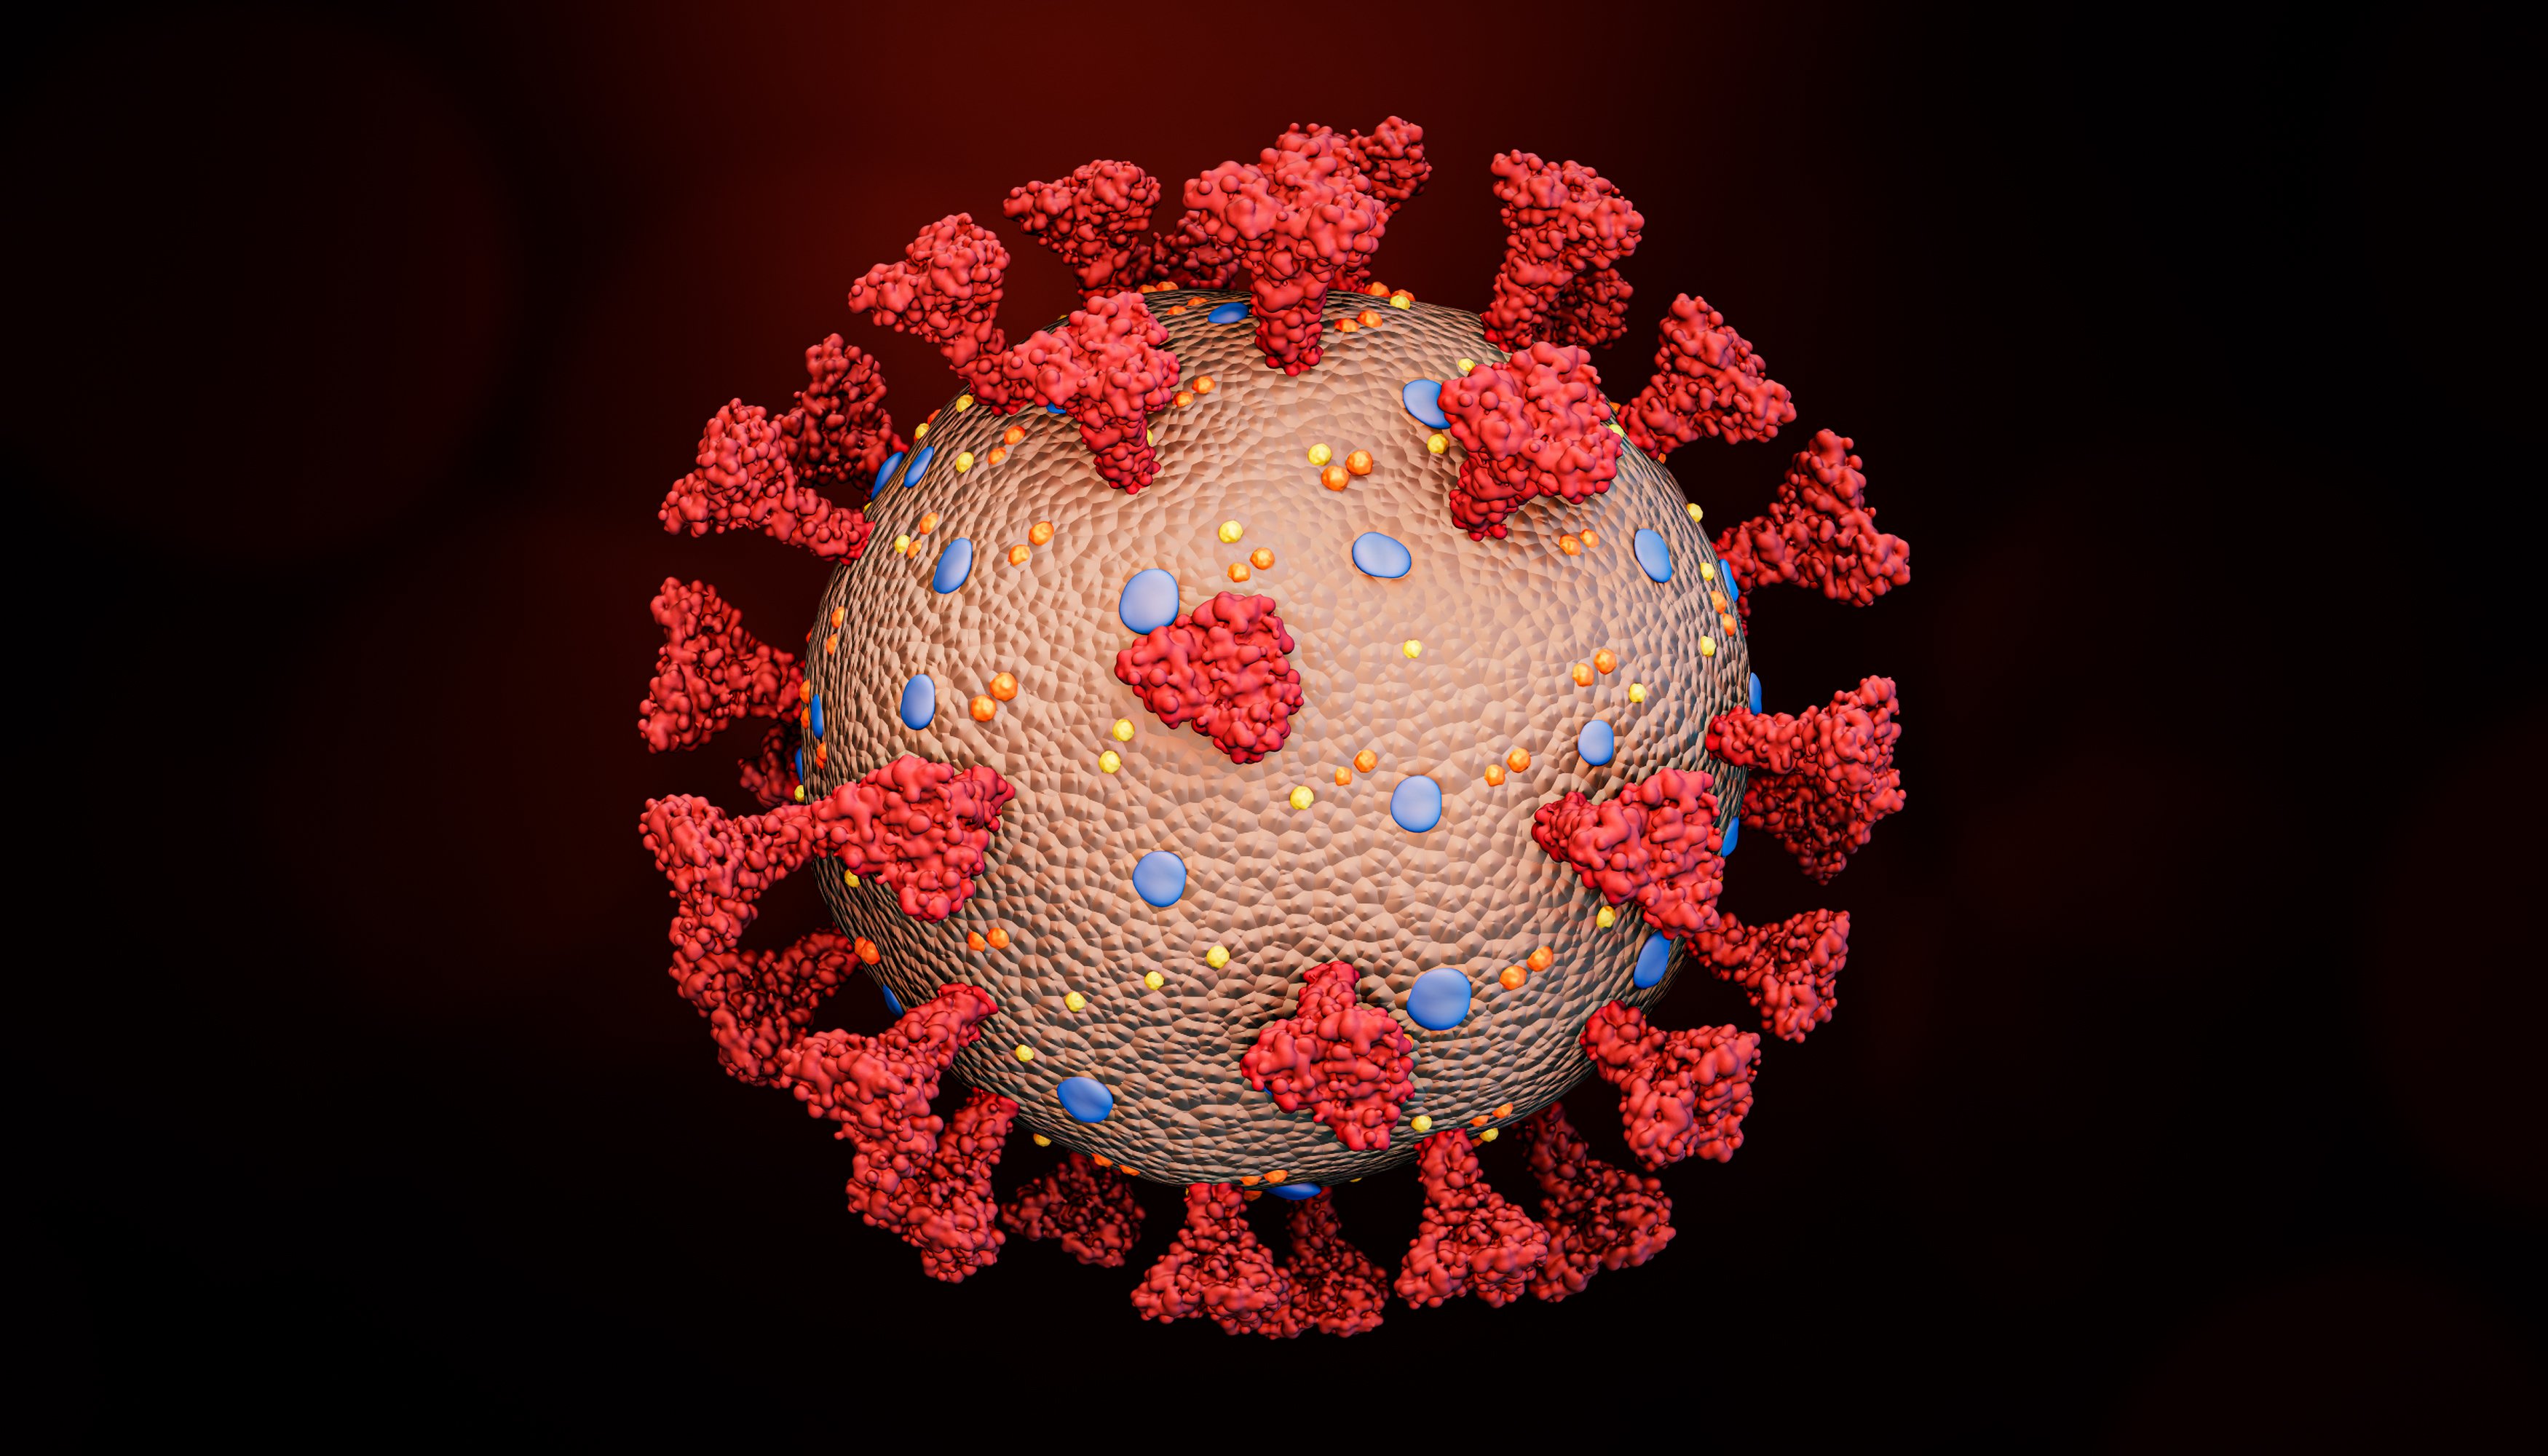 Rendering of COVID-19 or a flu virus structure with spikes glycoprotein, M proteins, E proteins, hemagglutinin and membrane.